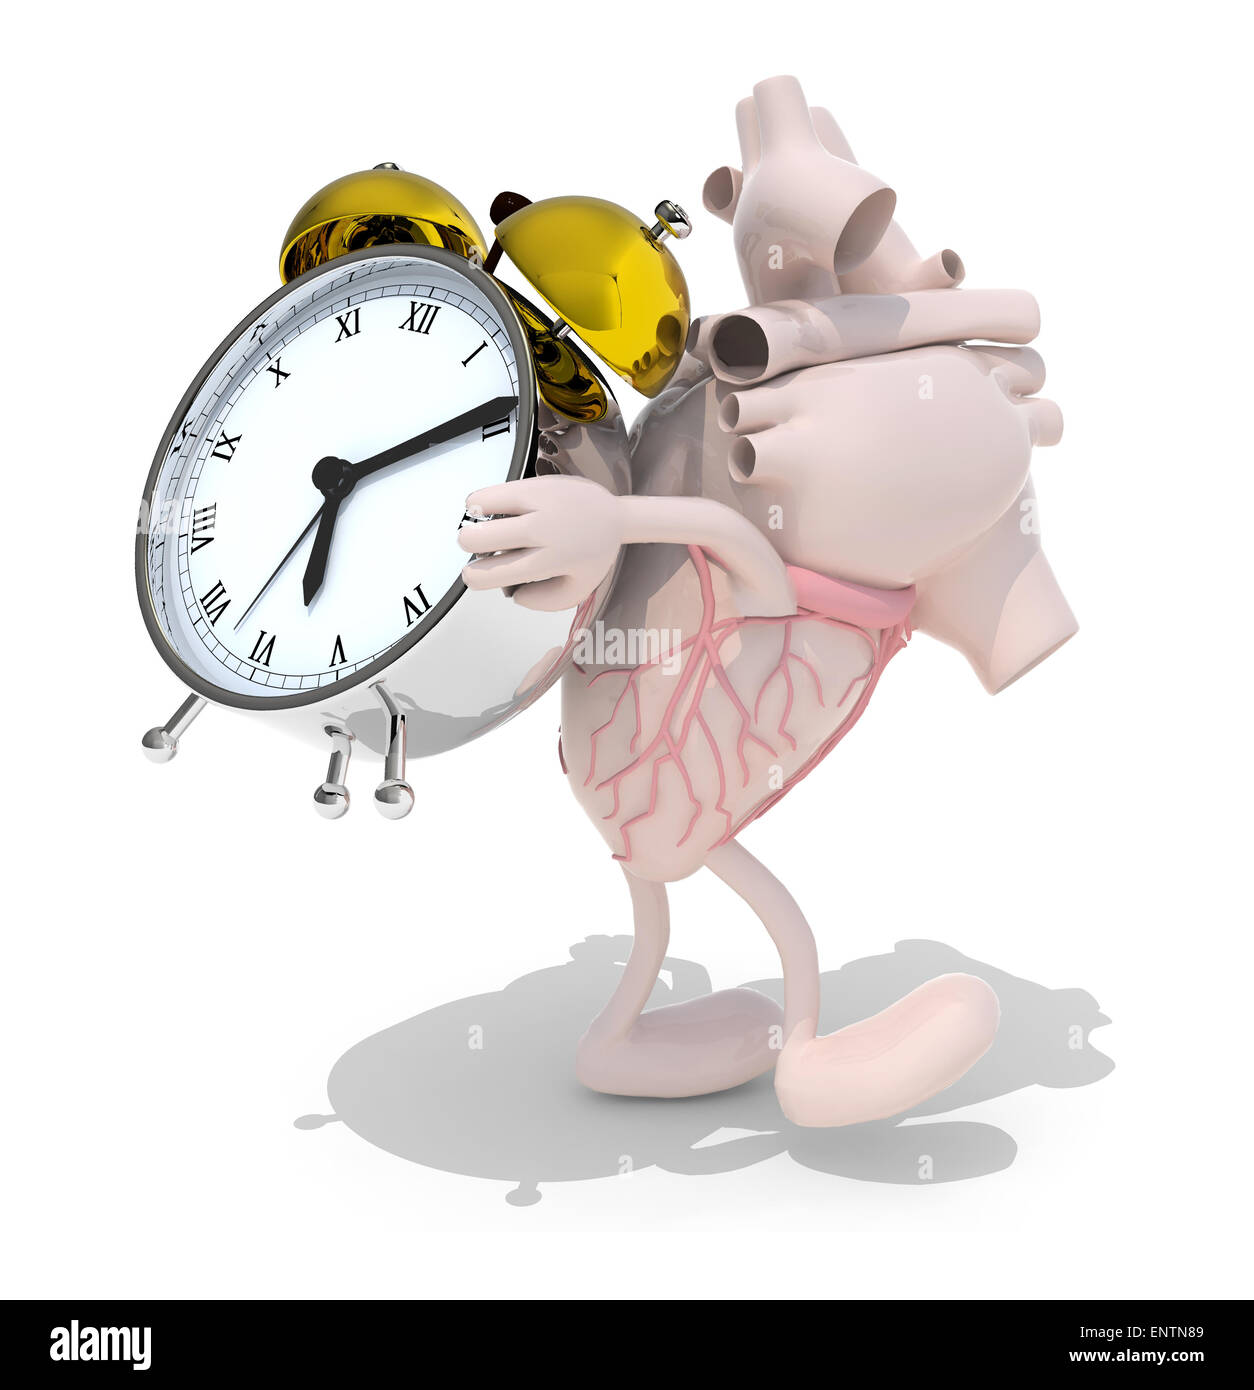 human heart with arms, legs that brings alarm clock, isolated 3d illustration Stock Photo